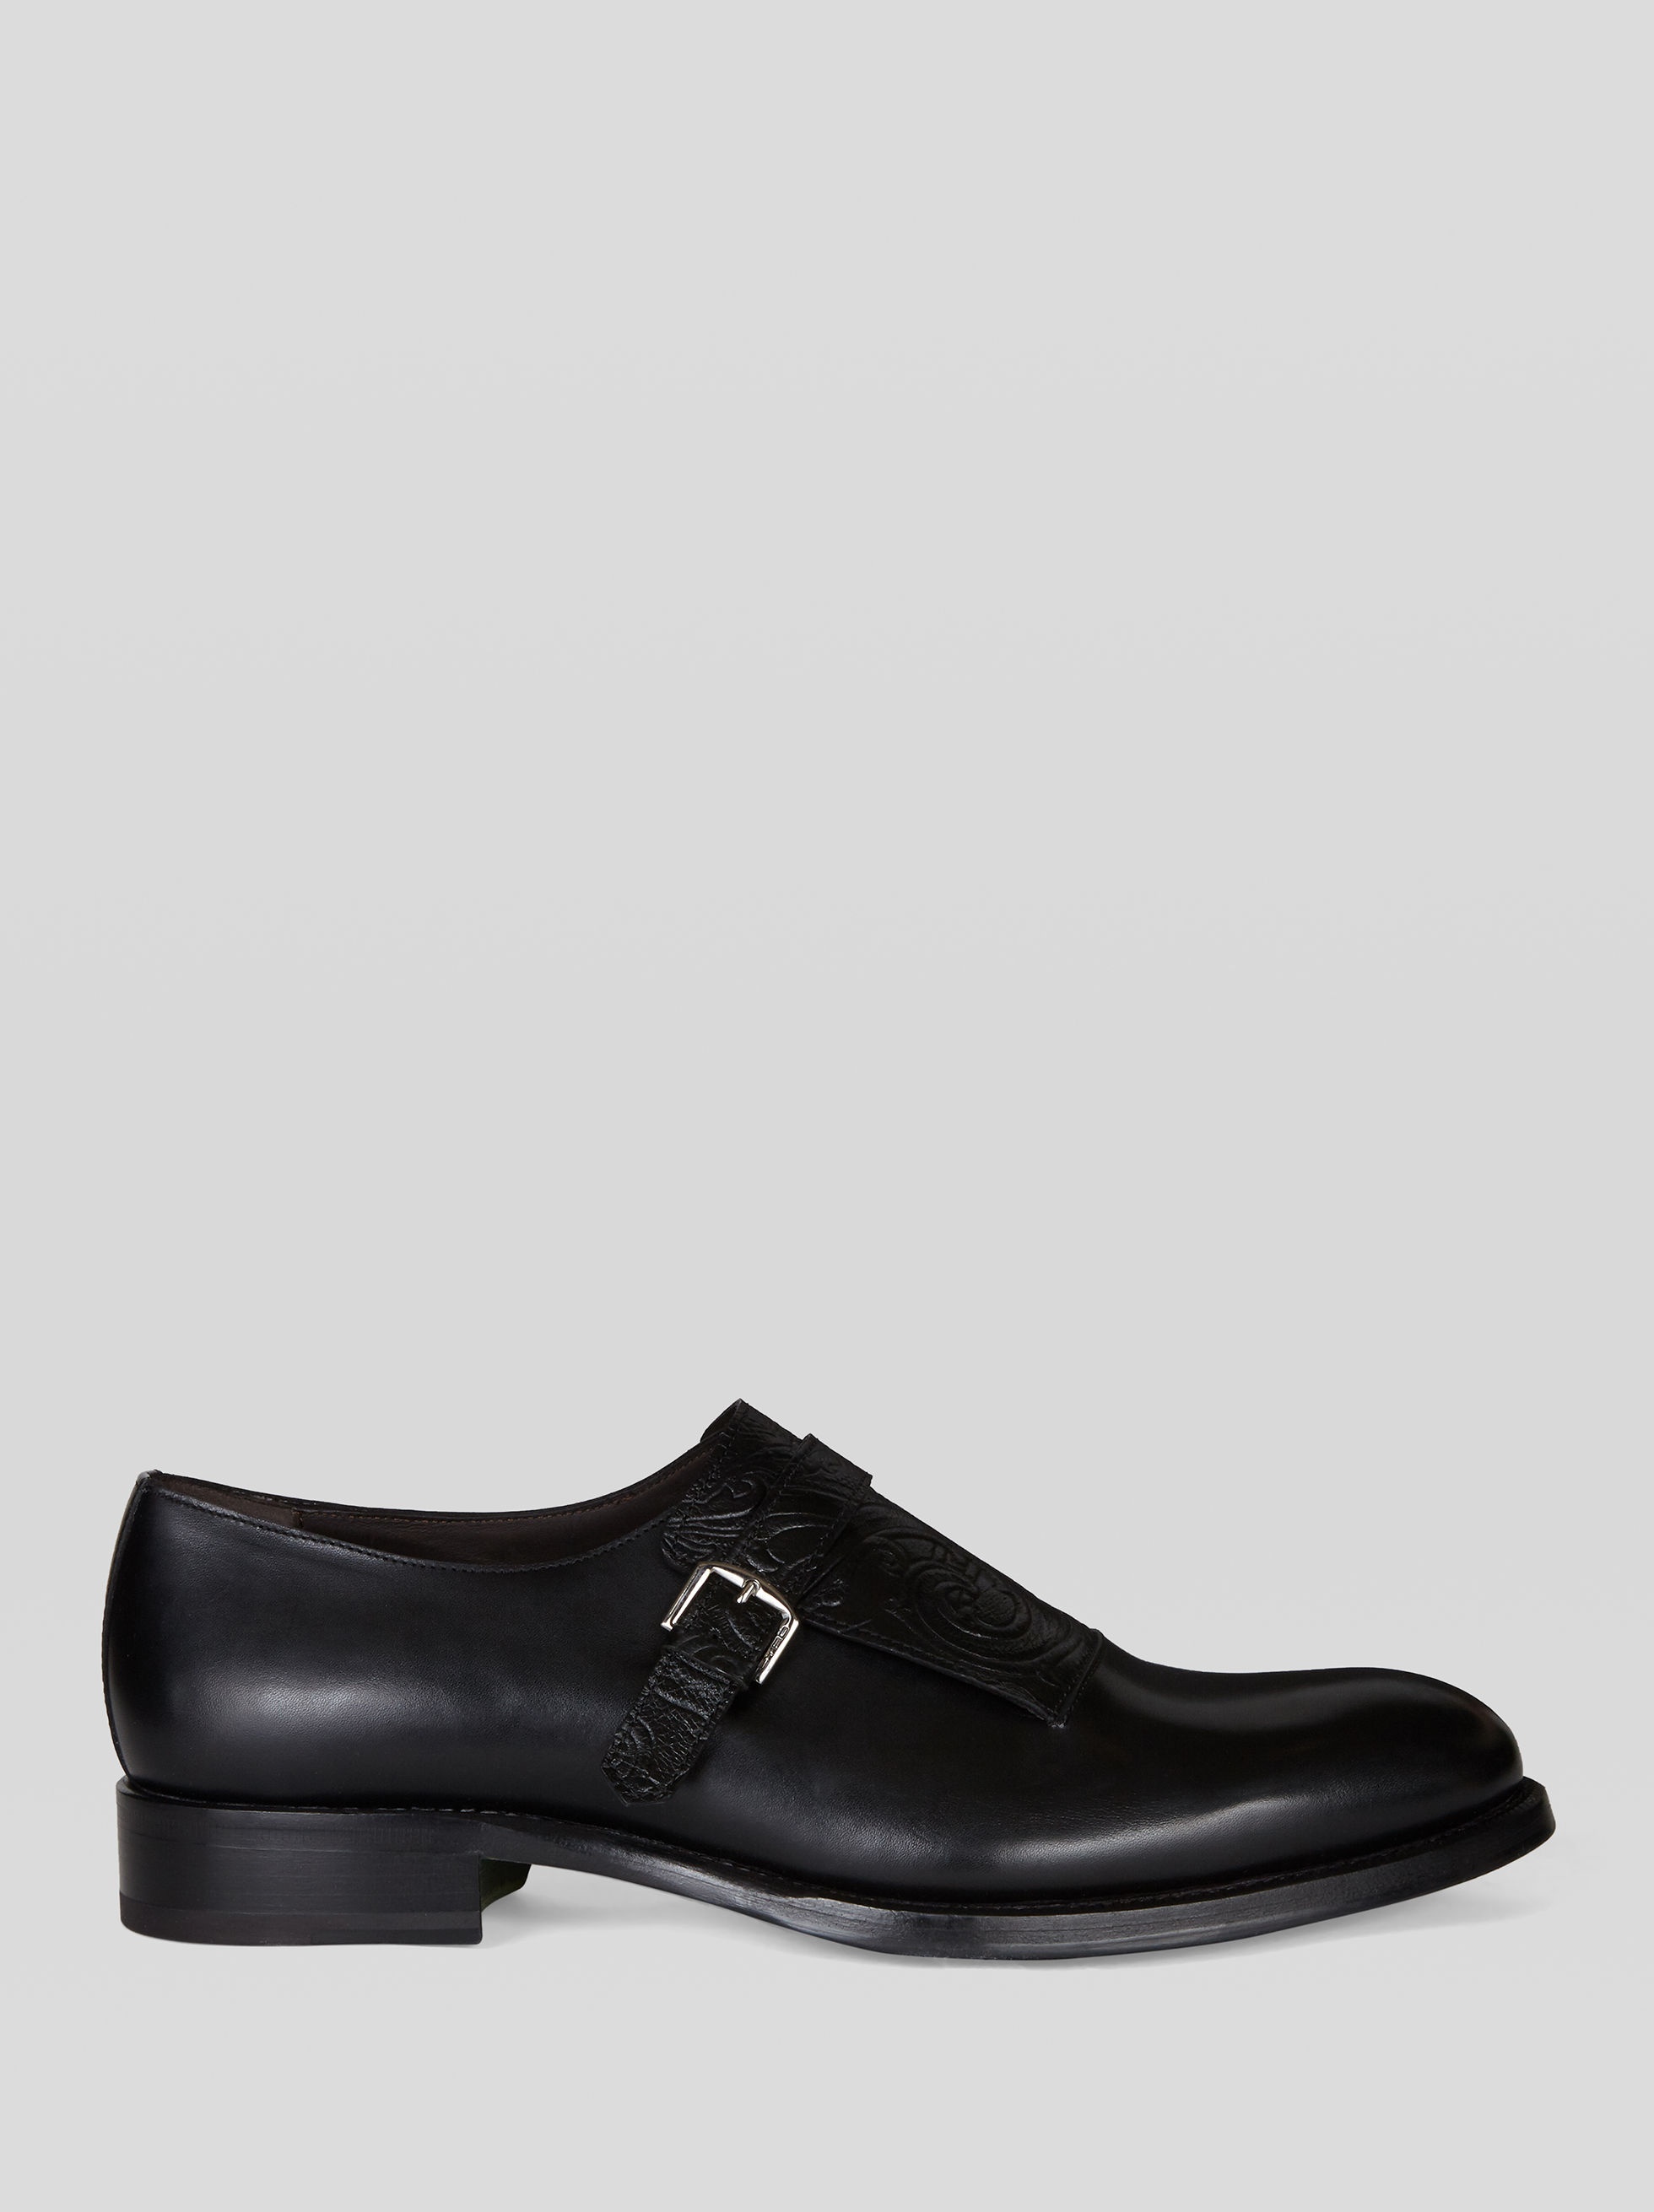 LEATHER MONK STRAPS WITH PAISLEY PATTERN - 1